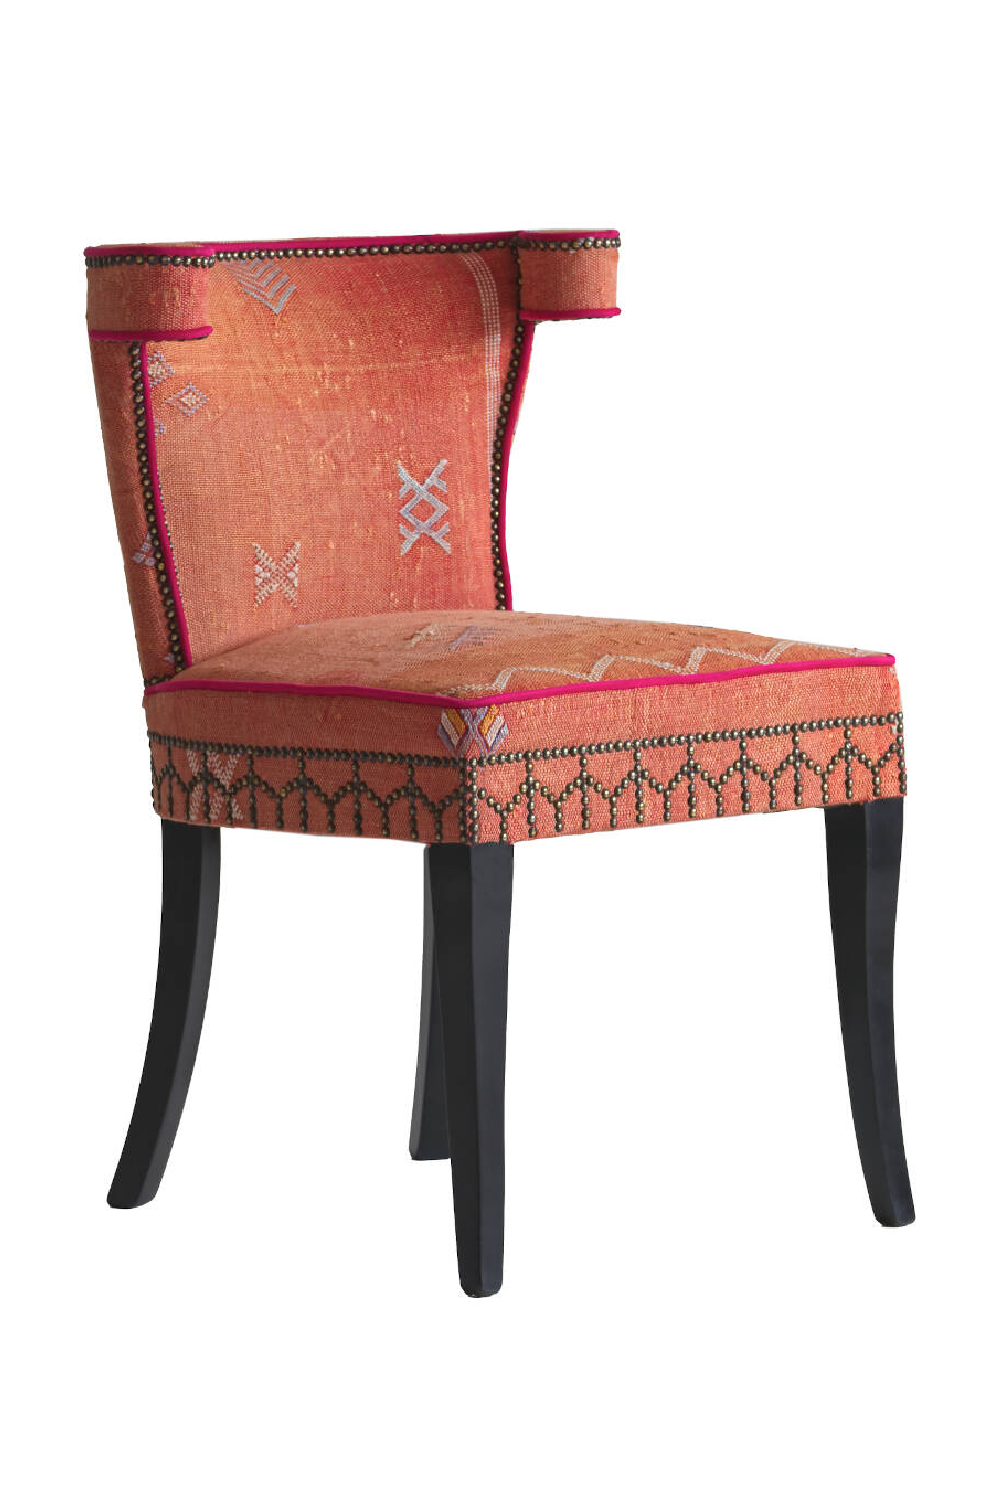 Cactus Silk Moroccan Dining Chair | Andrew Martin Vincent | Oroa.com